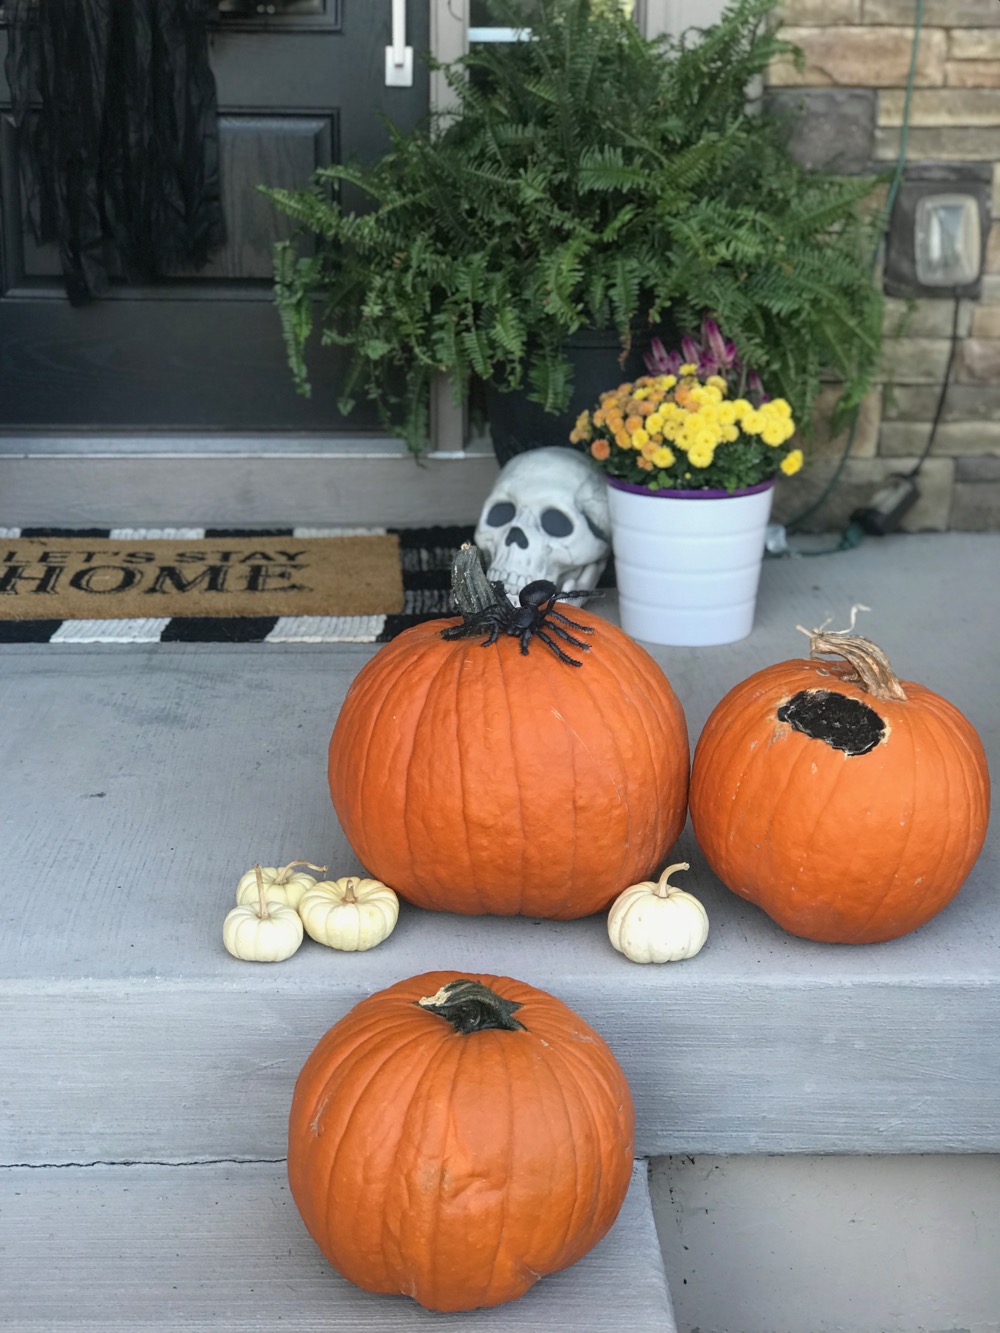 How to Decorate a Halloween Front Porch - Life Love Larson